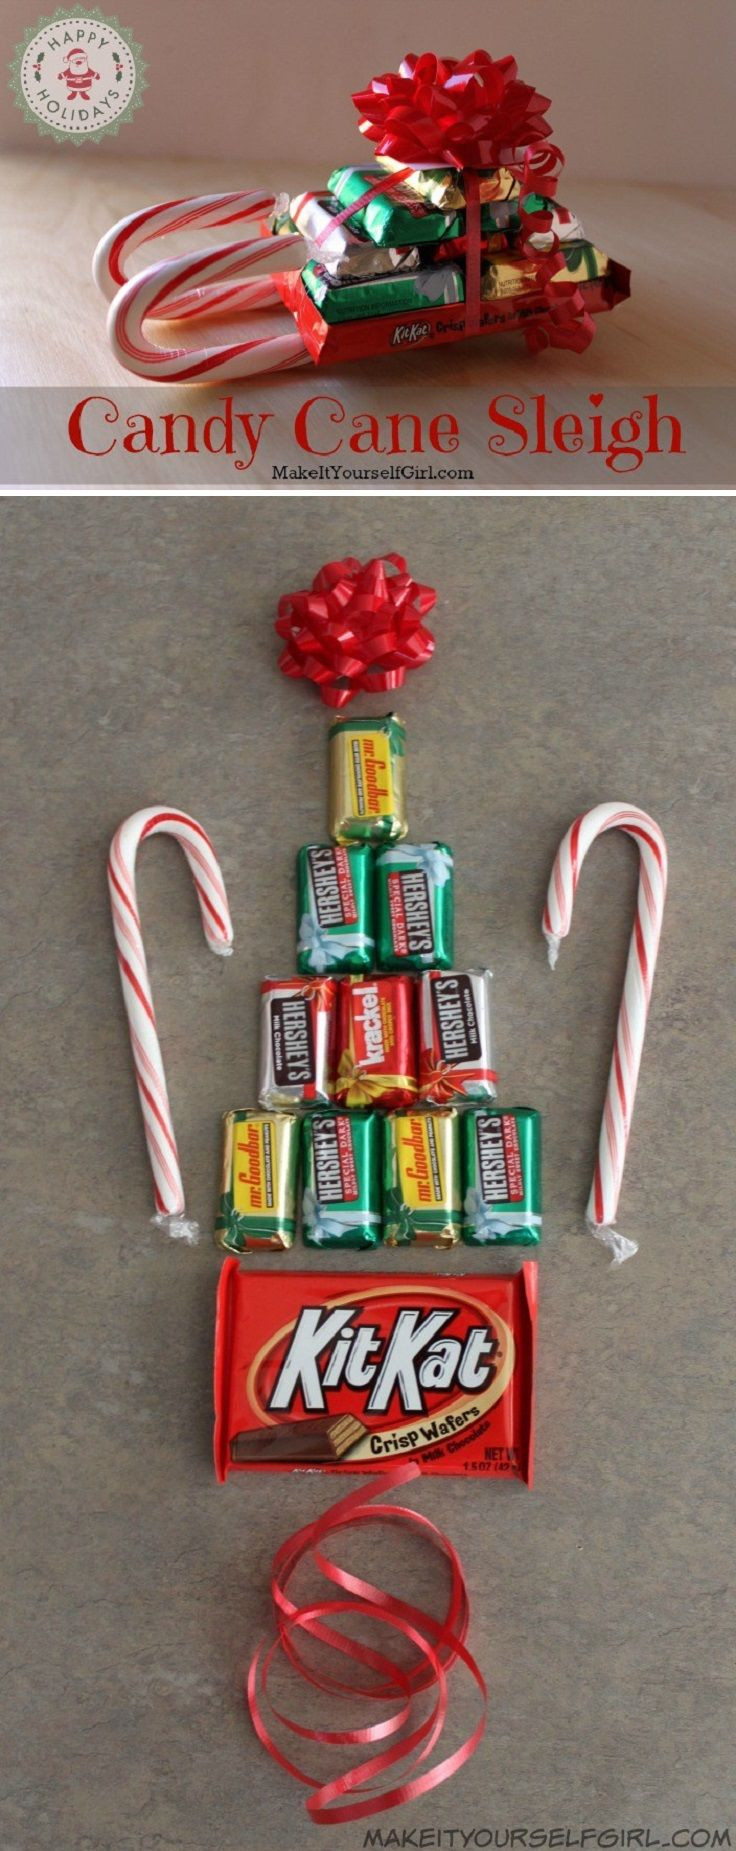 Christmas Party Favors For Kids
 Simple DIY Candy Cane Sleigh 12 Wondrous DIY Candy Cane